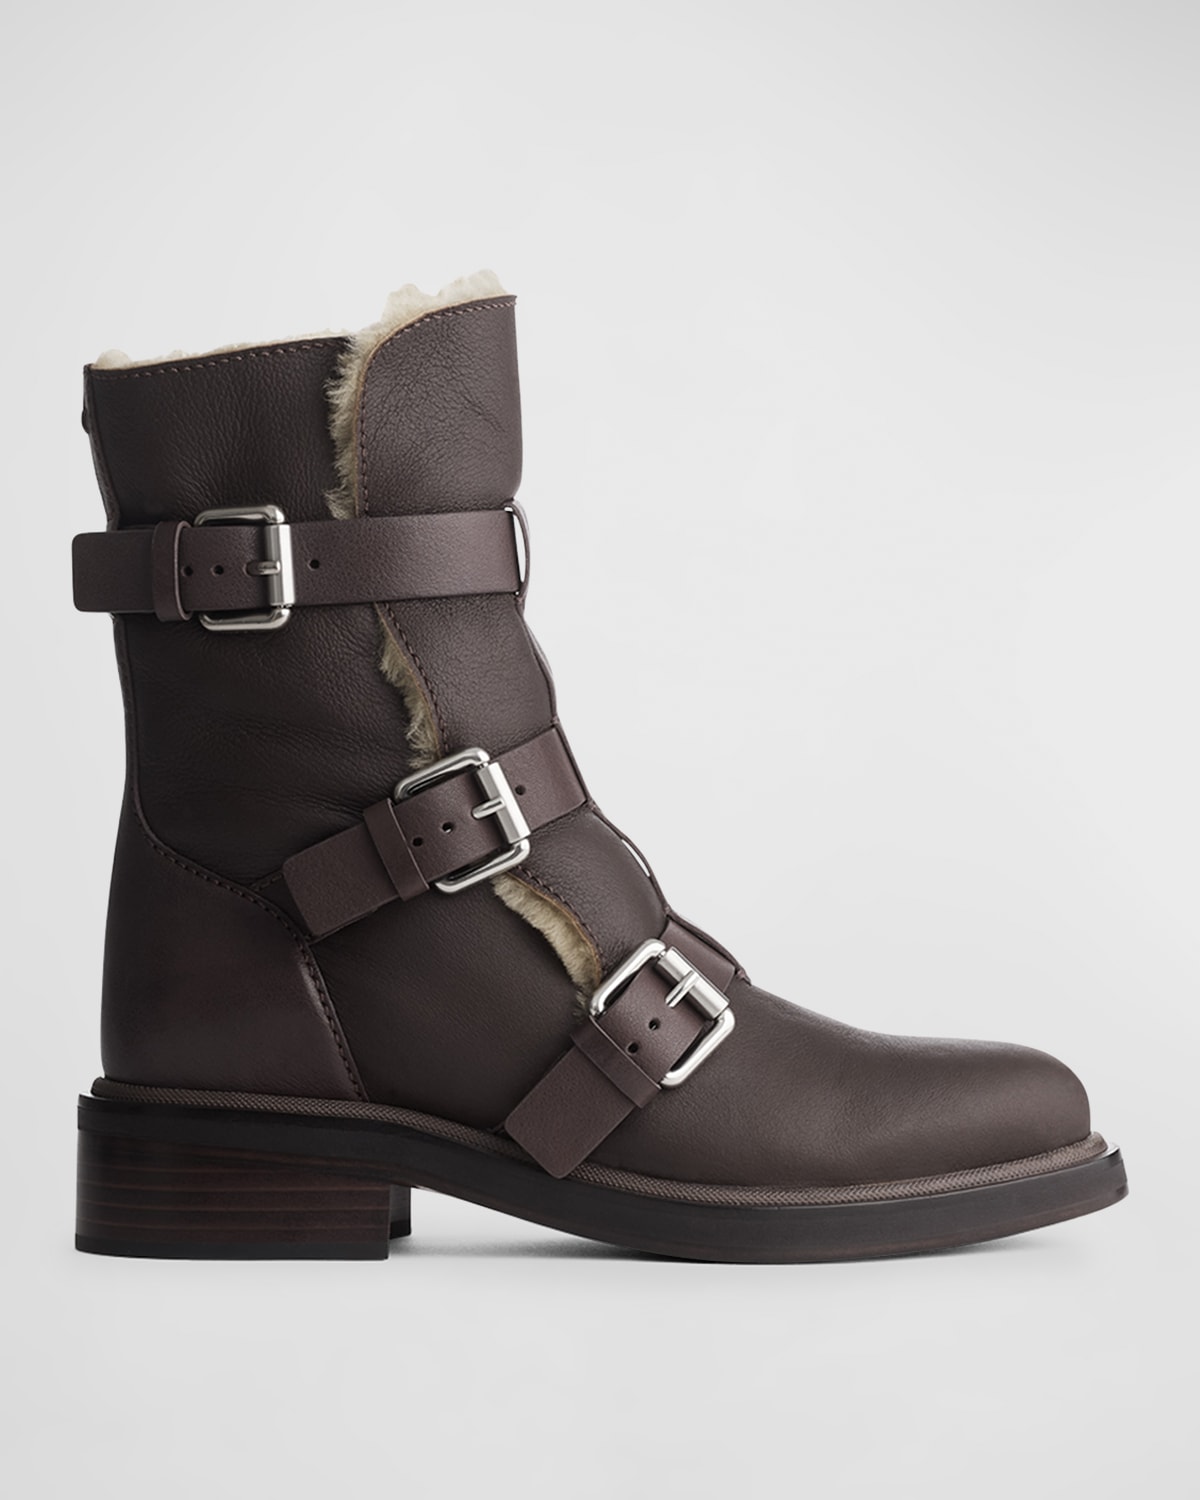 RAG & BONE RB LEATHER SHEARLING BUCKLE MOTO BOOTS